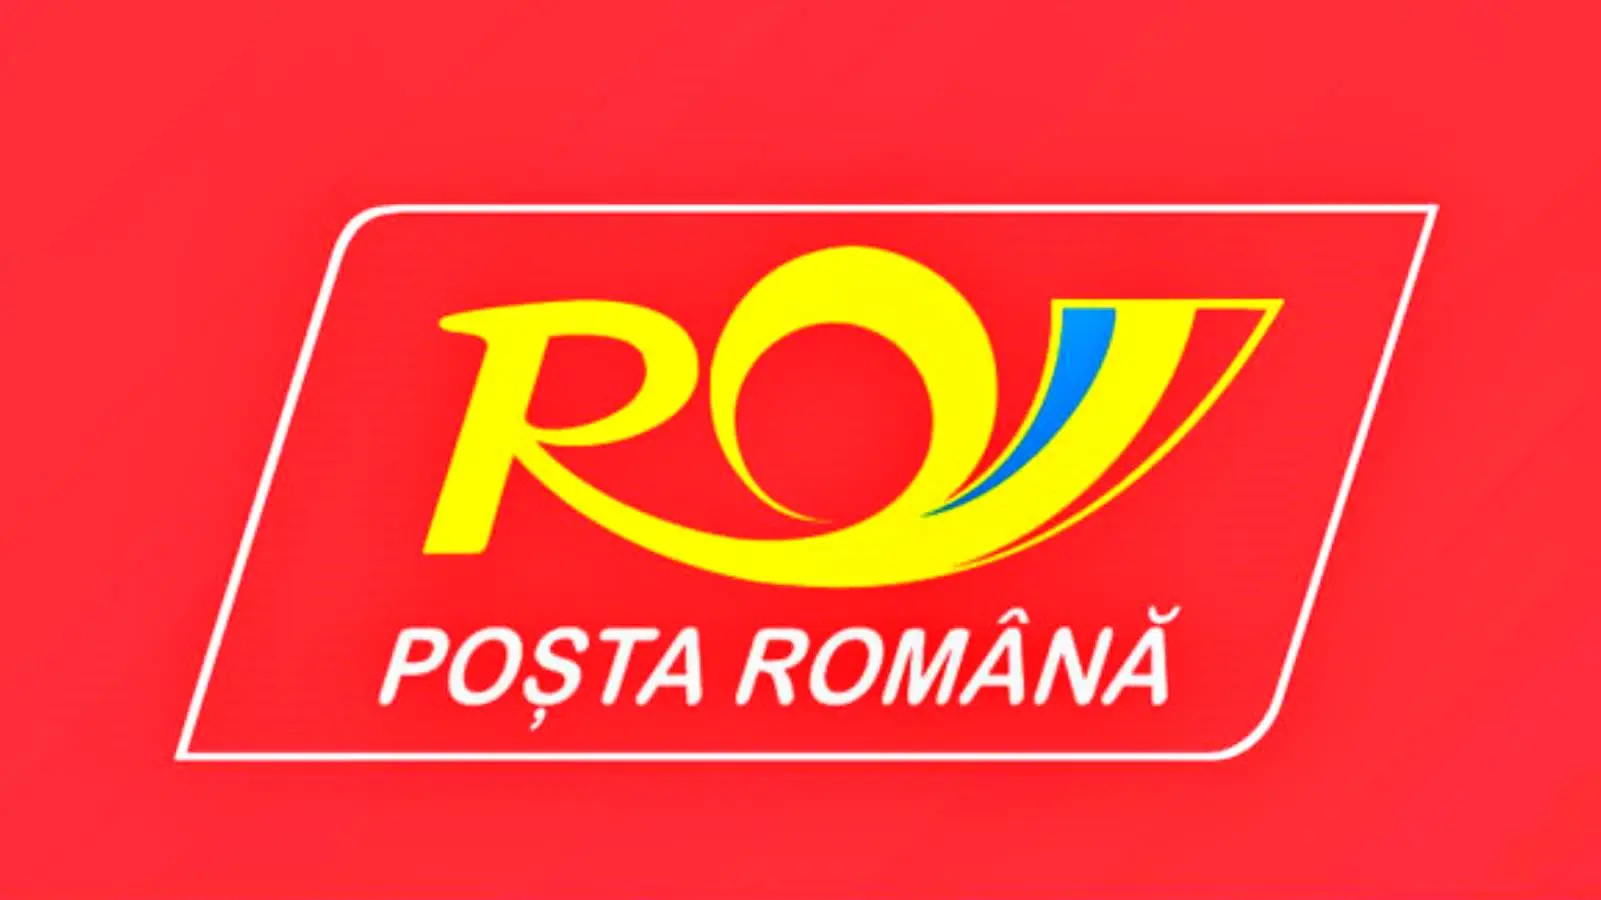 The advantages of using the services of the Romanian Post OLX purchases